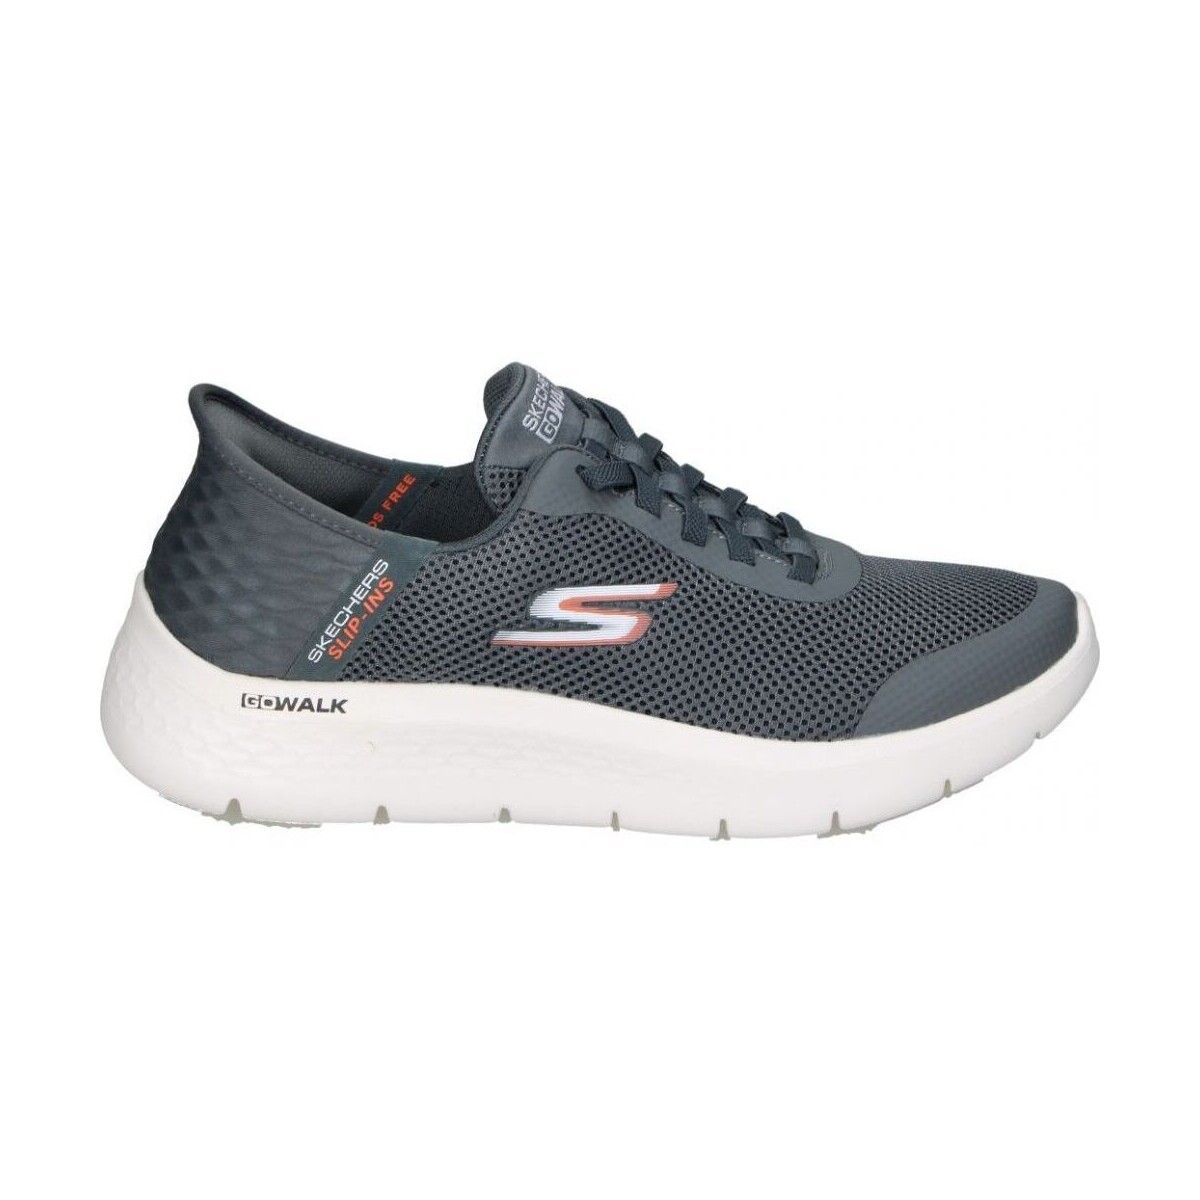 Chaussures Homme Multisport Skechers 216324-GRY Gris